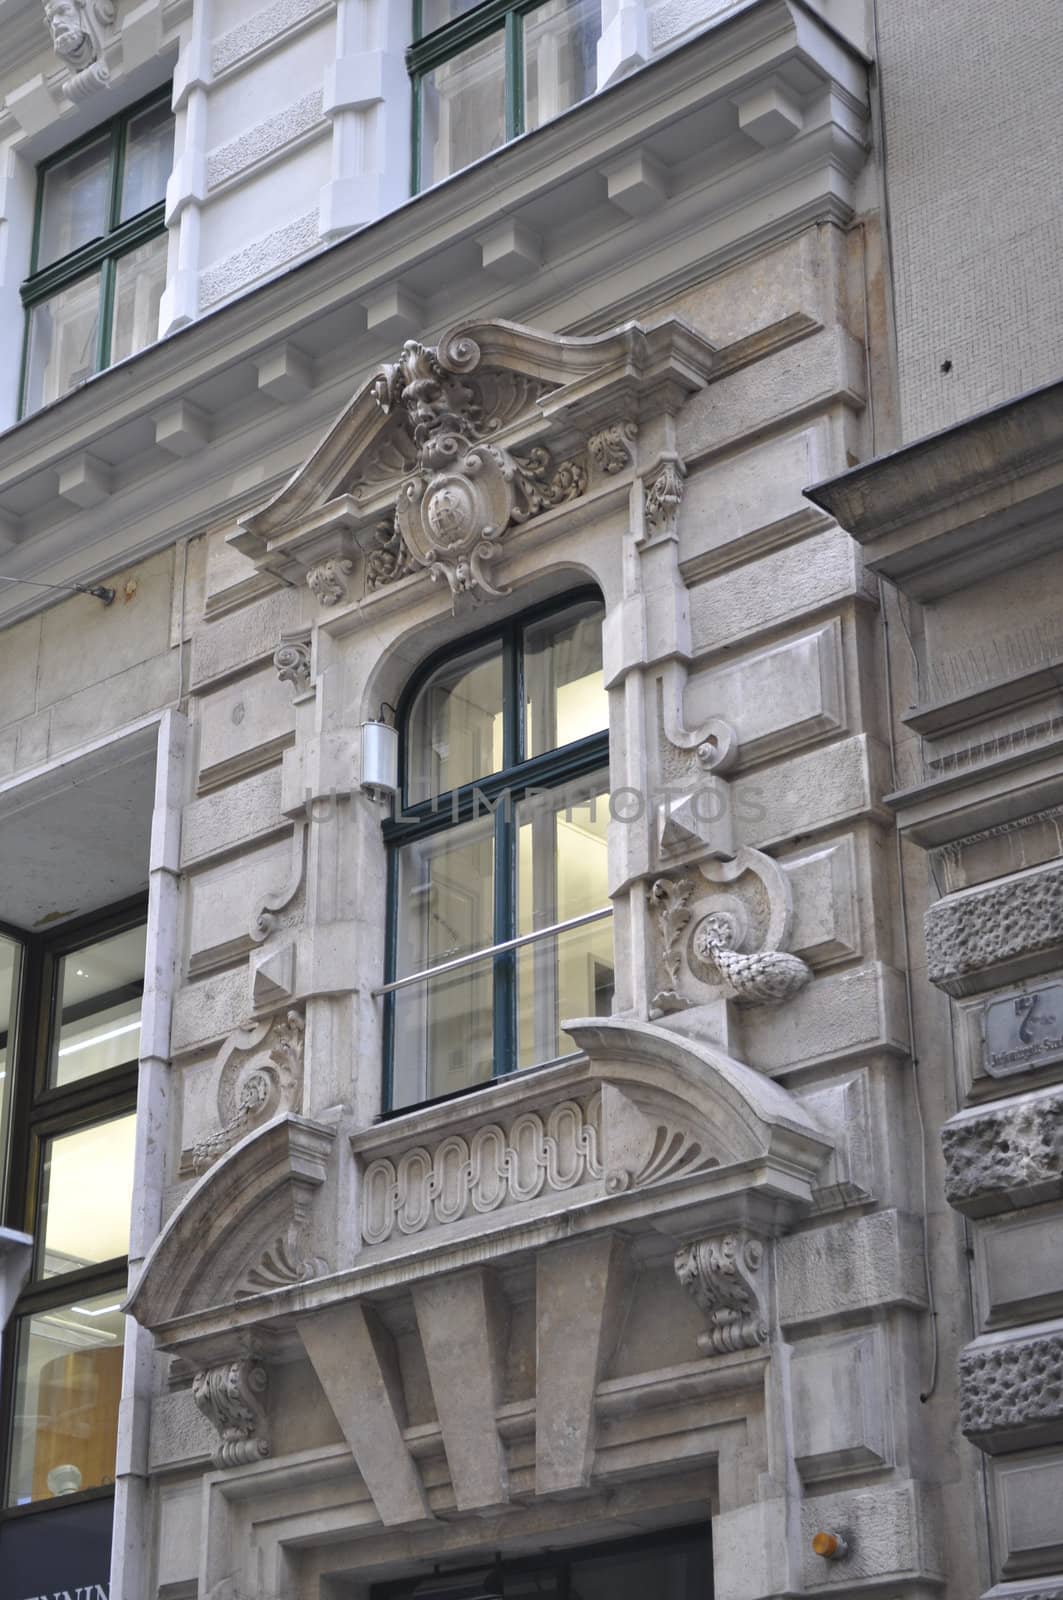 Viennese architecture in the Baroque style. Austria